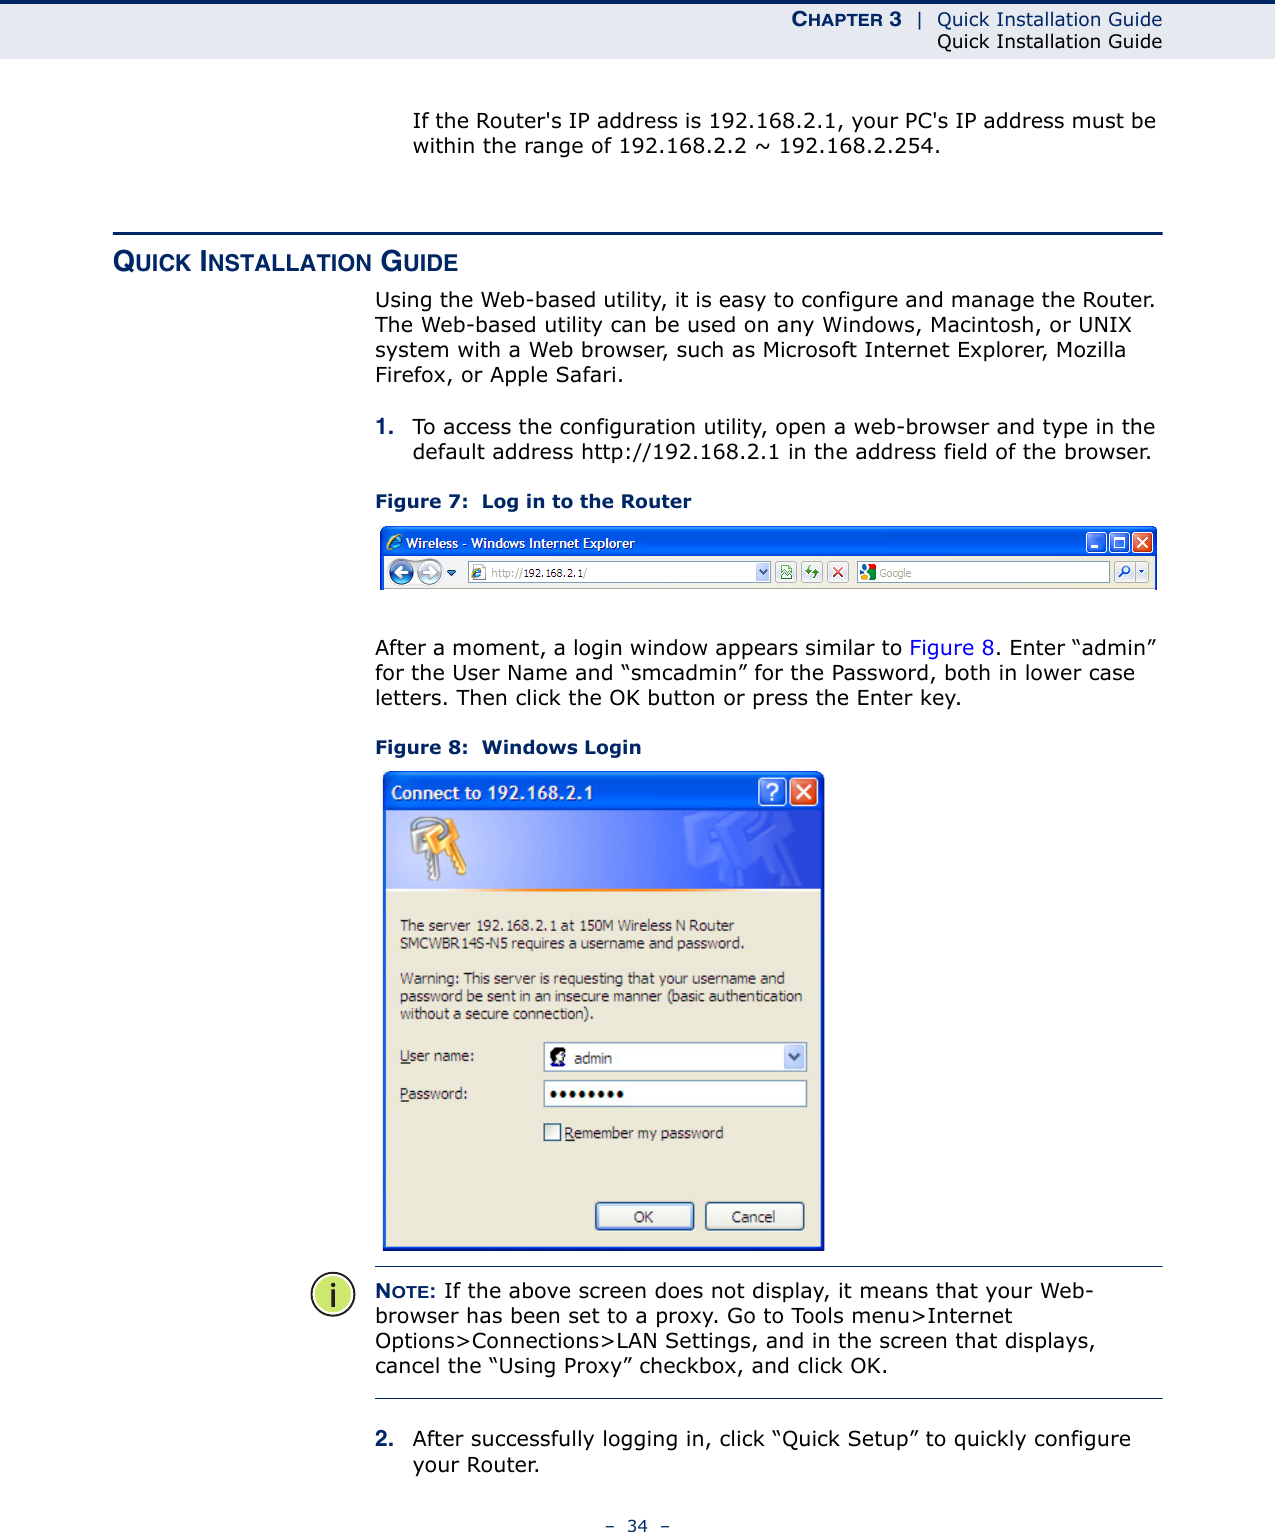 CHAPTER 3  |  Quick Installation GuideQuick Installation Guide–  34  –If the Router&apos;s IP address is 192.168.2.1, your PC&apos;s IP address must be within the range of 192.168.2.2 ~ 192.168.2.254.QUICK INSTALLATION GUIDEUsing the Web-based utility, it is easy to configure and manage the Router. The Web-based utility can be used on any Windows, Macintosh, or UNIX system with a Web browser, such as Microsoft Internet Explorer, Mozilla Firefox, or Apple Safari.1. To access the configuration utility, open a web-browser and type in the default address http://192.168.2.1 in the address field of the browser.Figure 7:  Log in to the RouterAfter a moment, a login window appears similar to Figure 8. Enter “admin” for the User Name and “smcadmin” for the Password, both in lower case letters. Then click the OK button or press the Enter key.Figure 8:  Windows LoginNOTE: If the above screen does not display, it means that your Web-browser has been set to a proxy. Go to Tools menu&gt;Internet Options&gt;Connections&gt;LAN Settings, and in the screen that displays, cancel the “Using Proxy” checkbox, and click OK.2. After successfully logging in, click “Quick Setup” to quickly configure your Router.  